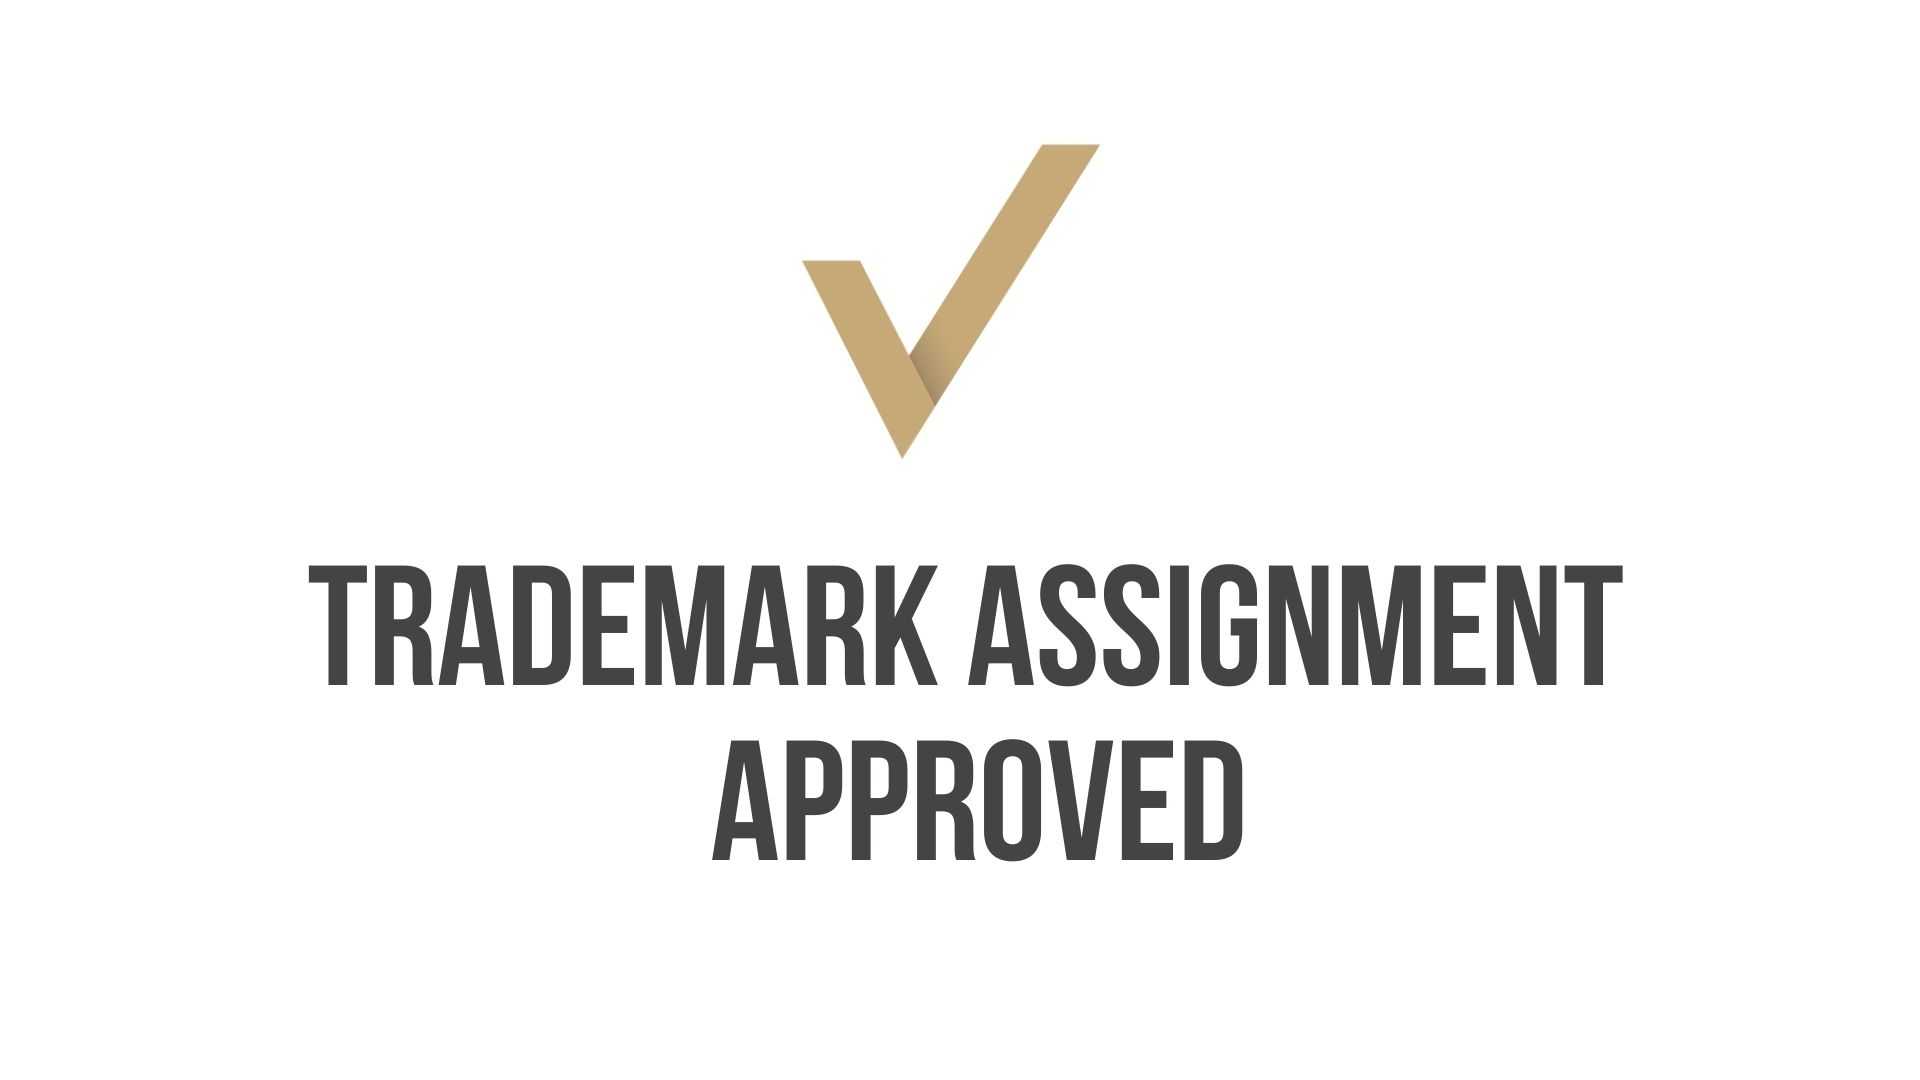 Trademark Assignment Approval